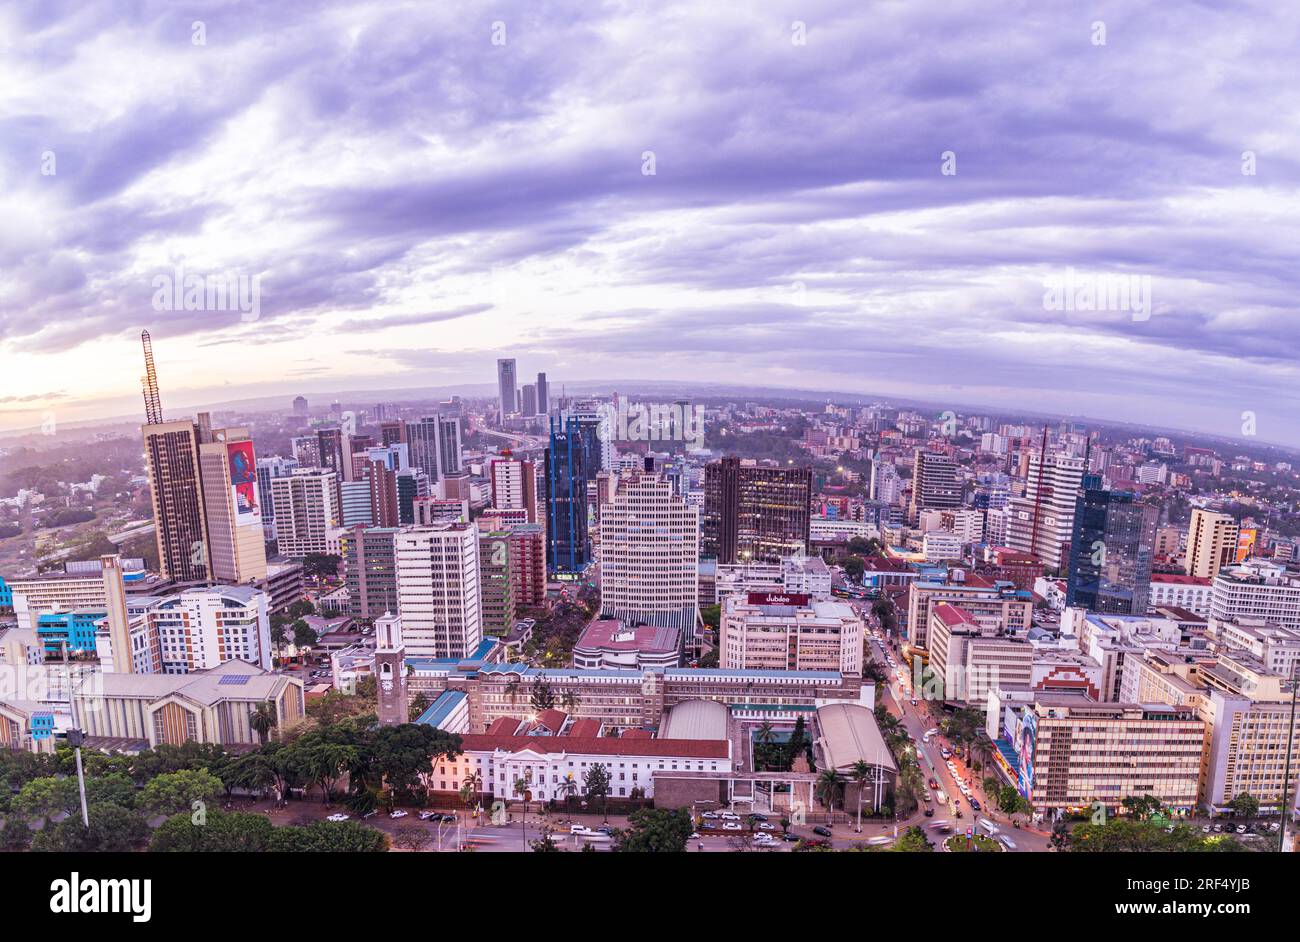 Nairobi City County Night Life Skyline Cityscapes Skyscrapers Landmark Tall Modern Buildings Architectural Highrise Towers In Kenya East Africa Capit Stock Photo